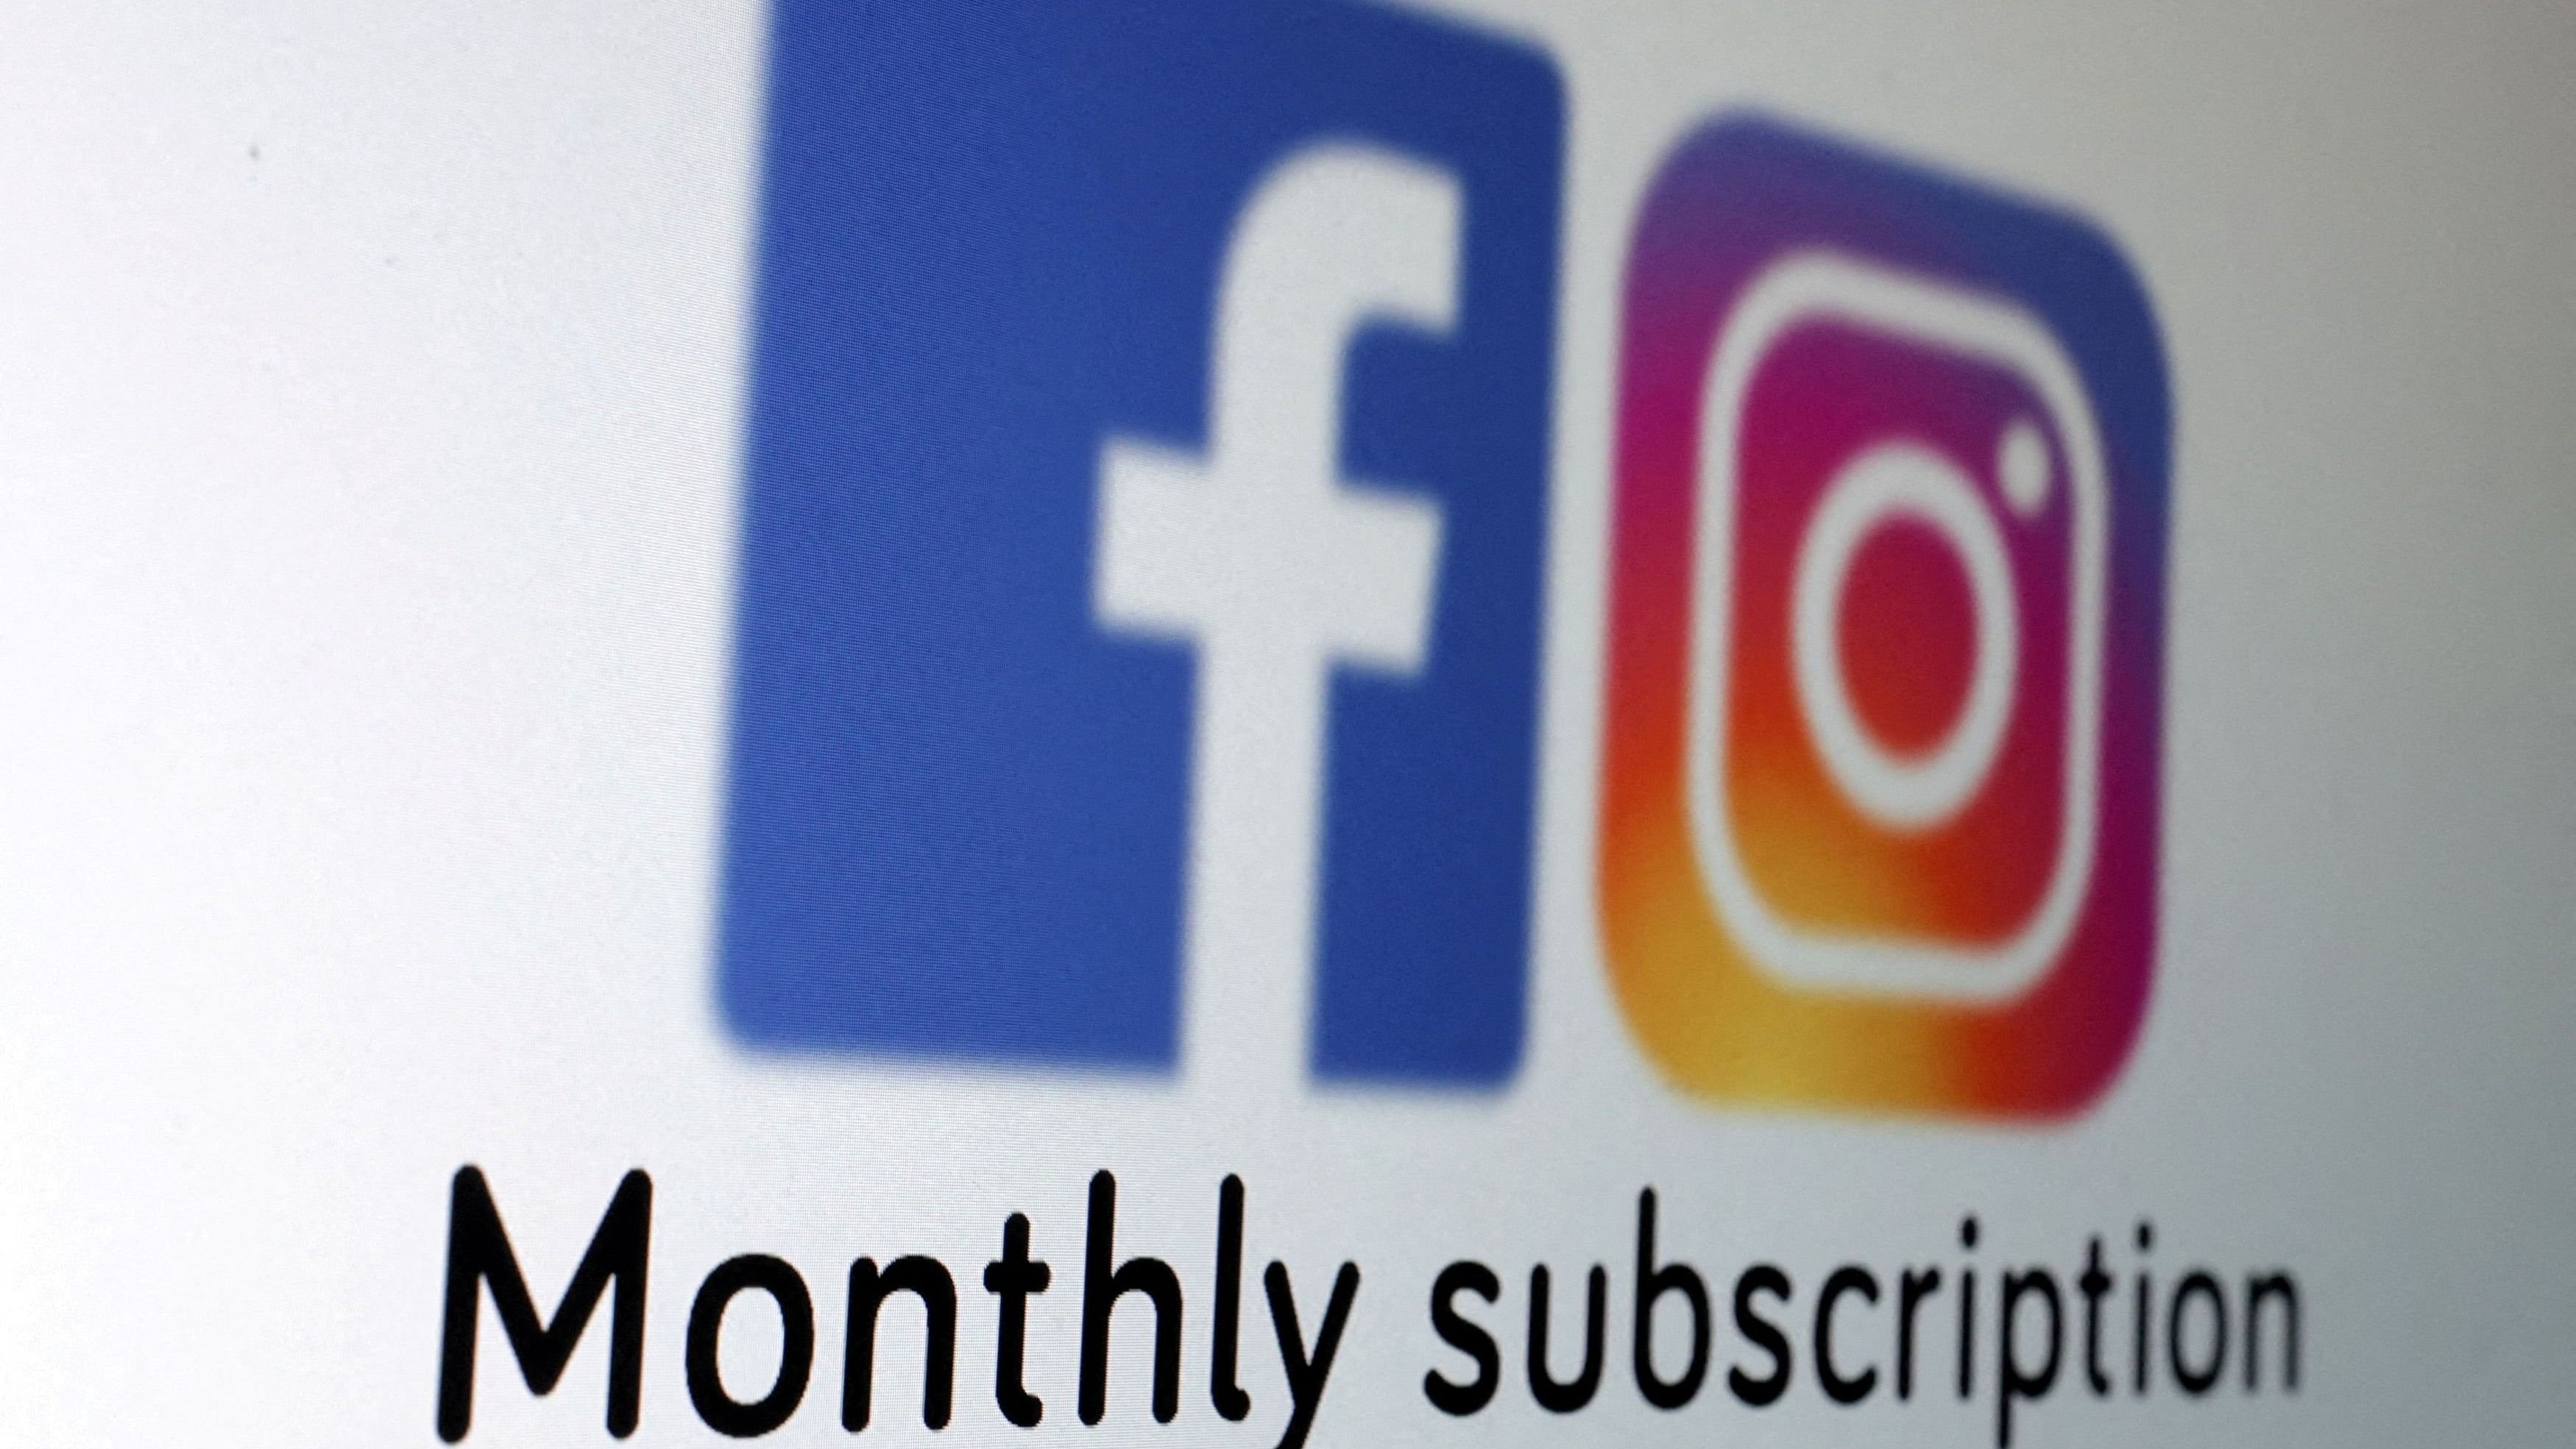 <div class="paragraphs"><p>The logos of Facebook and Instagram and the words "Monthly subscription" are seen in this picture illustration.</p></div>